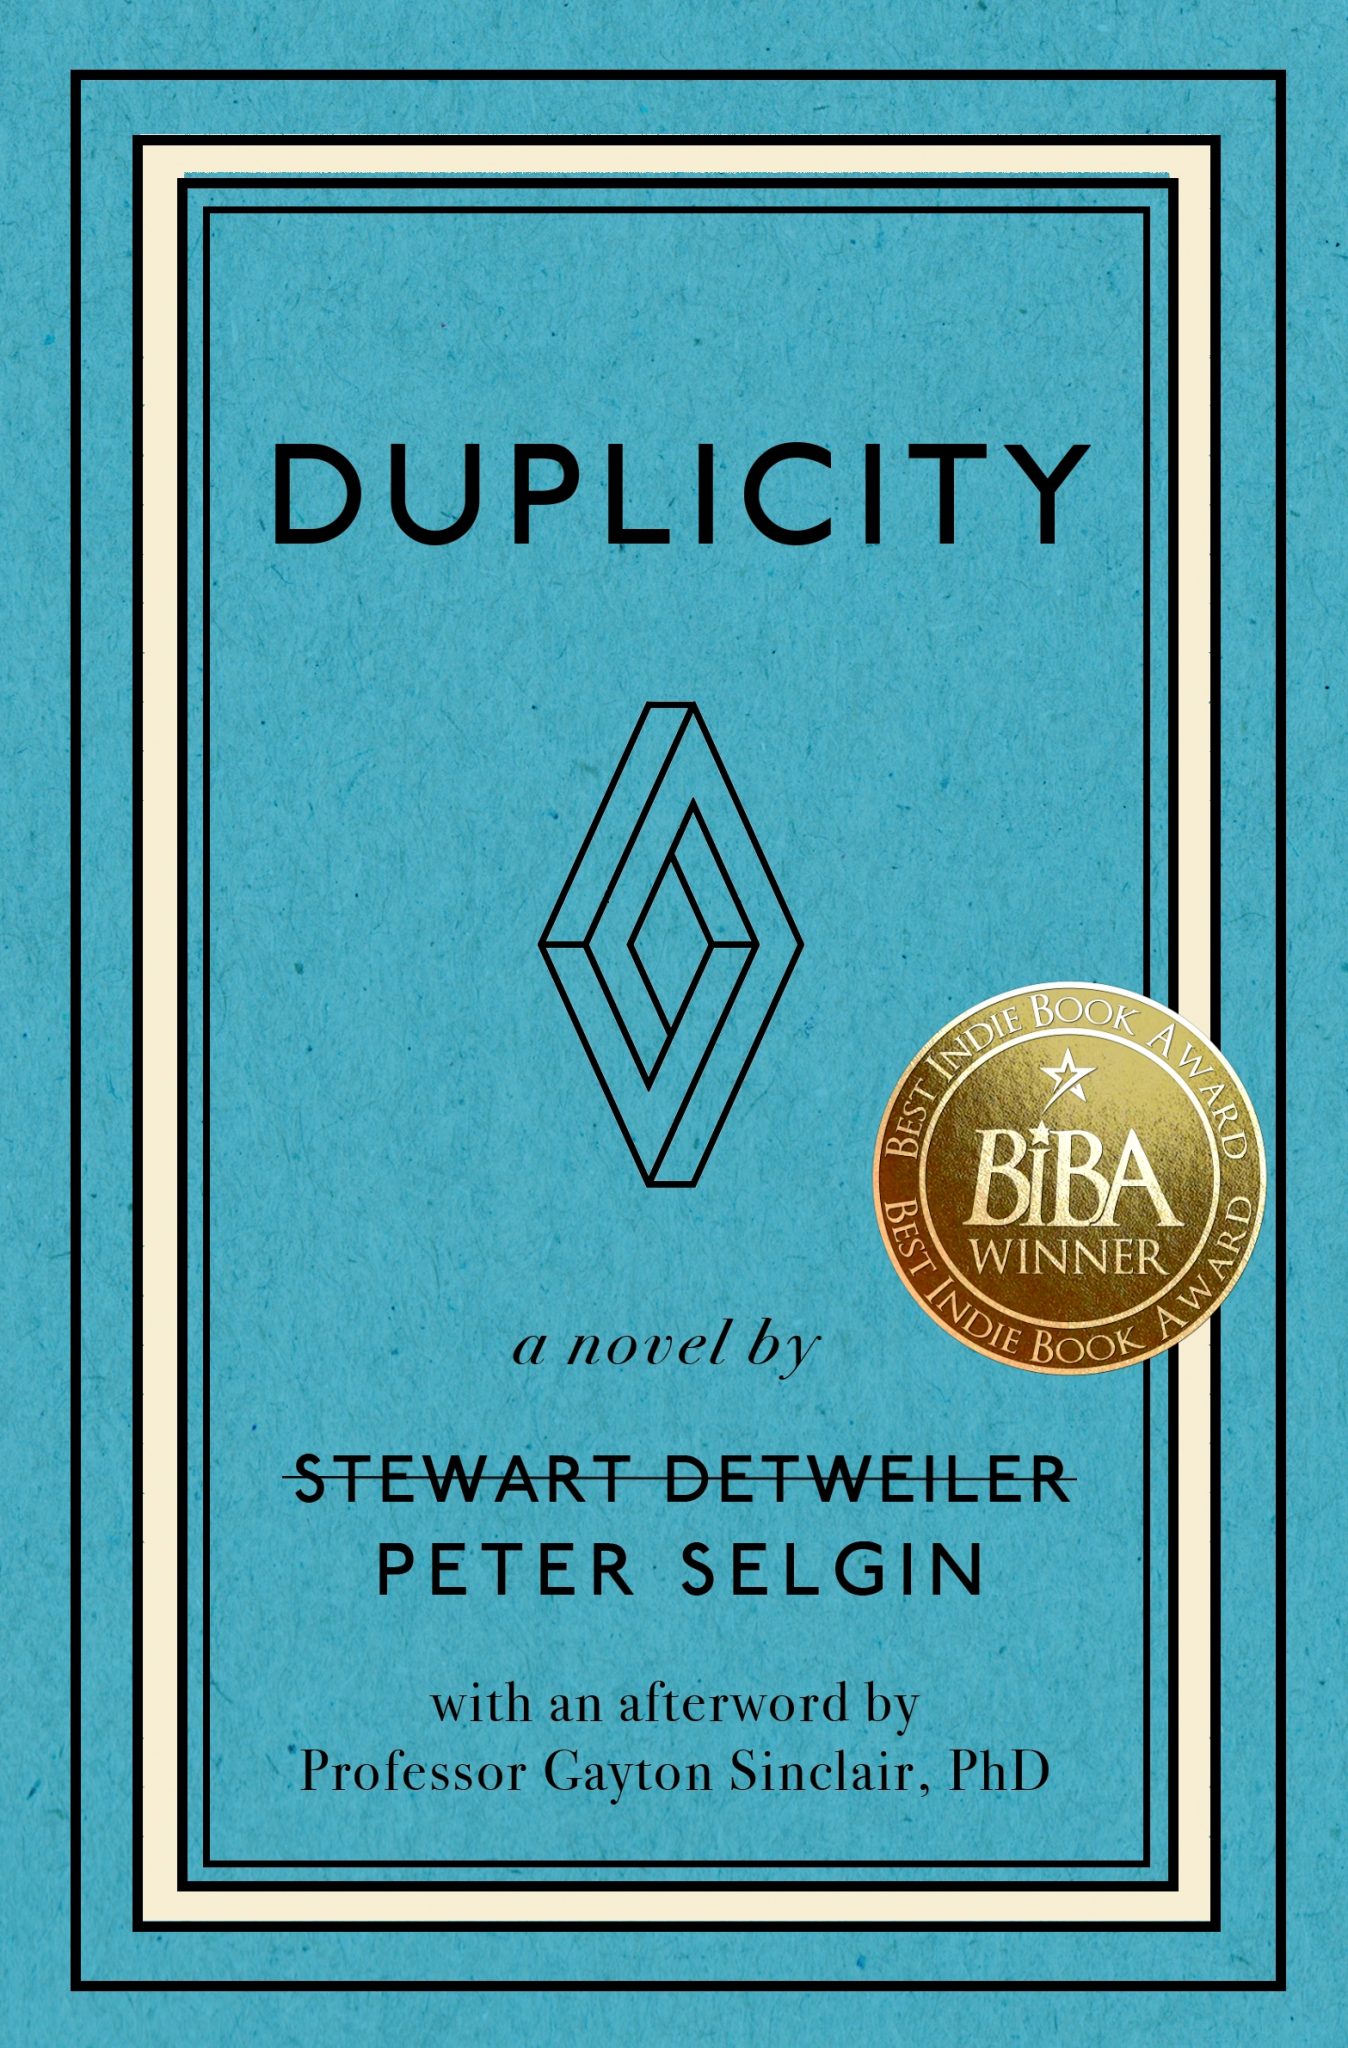 Duplicity, by Peter Selgin